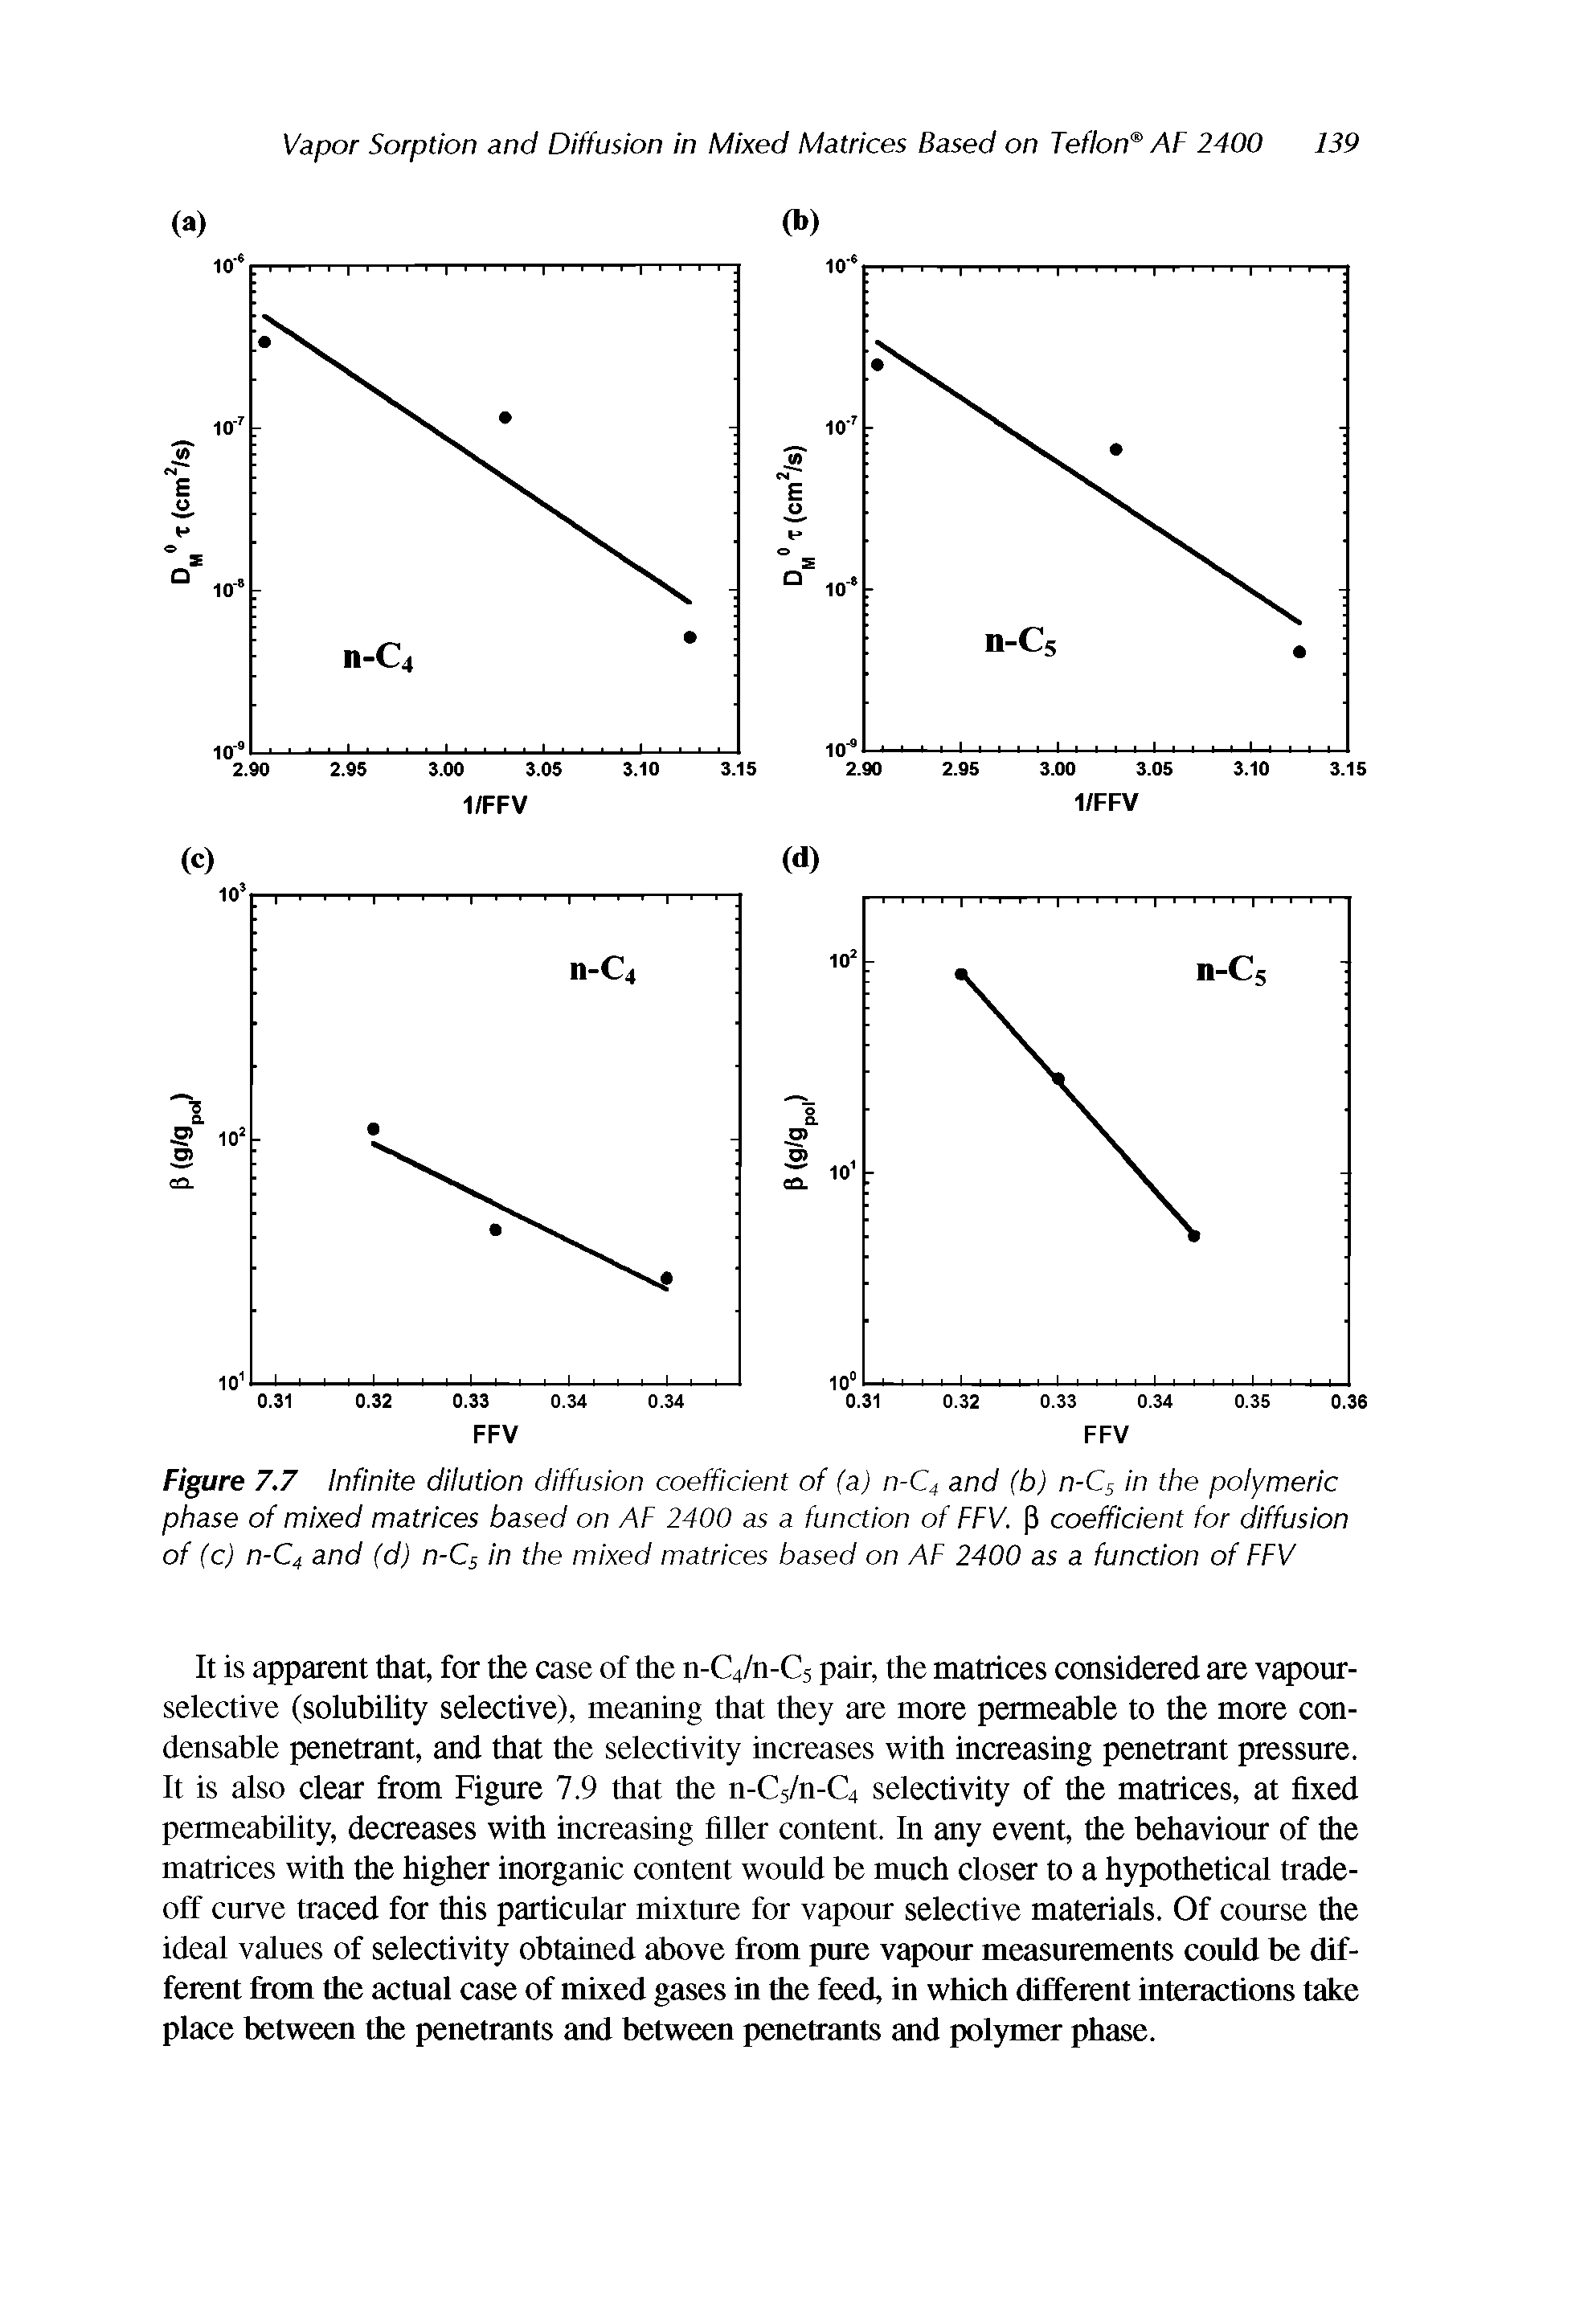 Figure 7.7 Infinite dilution diffusion coefficient of (a) n-C4 and (b) n-Cs in the polymeric phase of mixed matrices based on AF 2400 as a function of FFV. P coefficient for diffusion of (c) n-C4 and (d) n-Cs in the mixed matrices based on AF 2400 as a function of FFV...